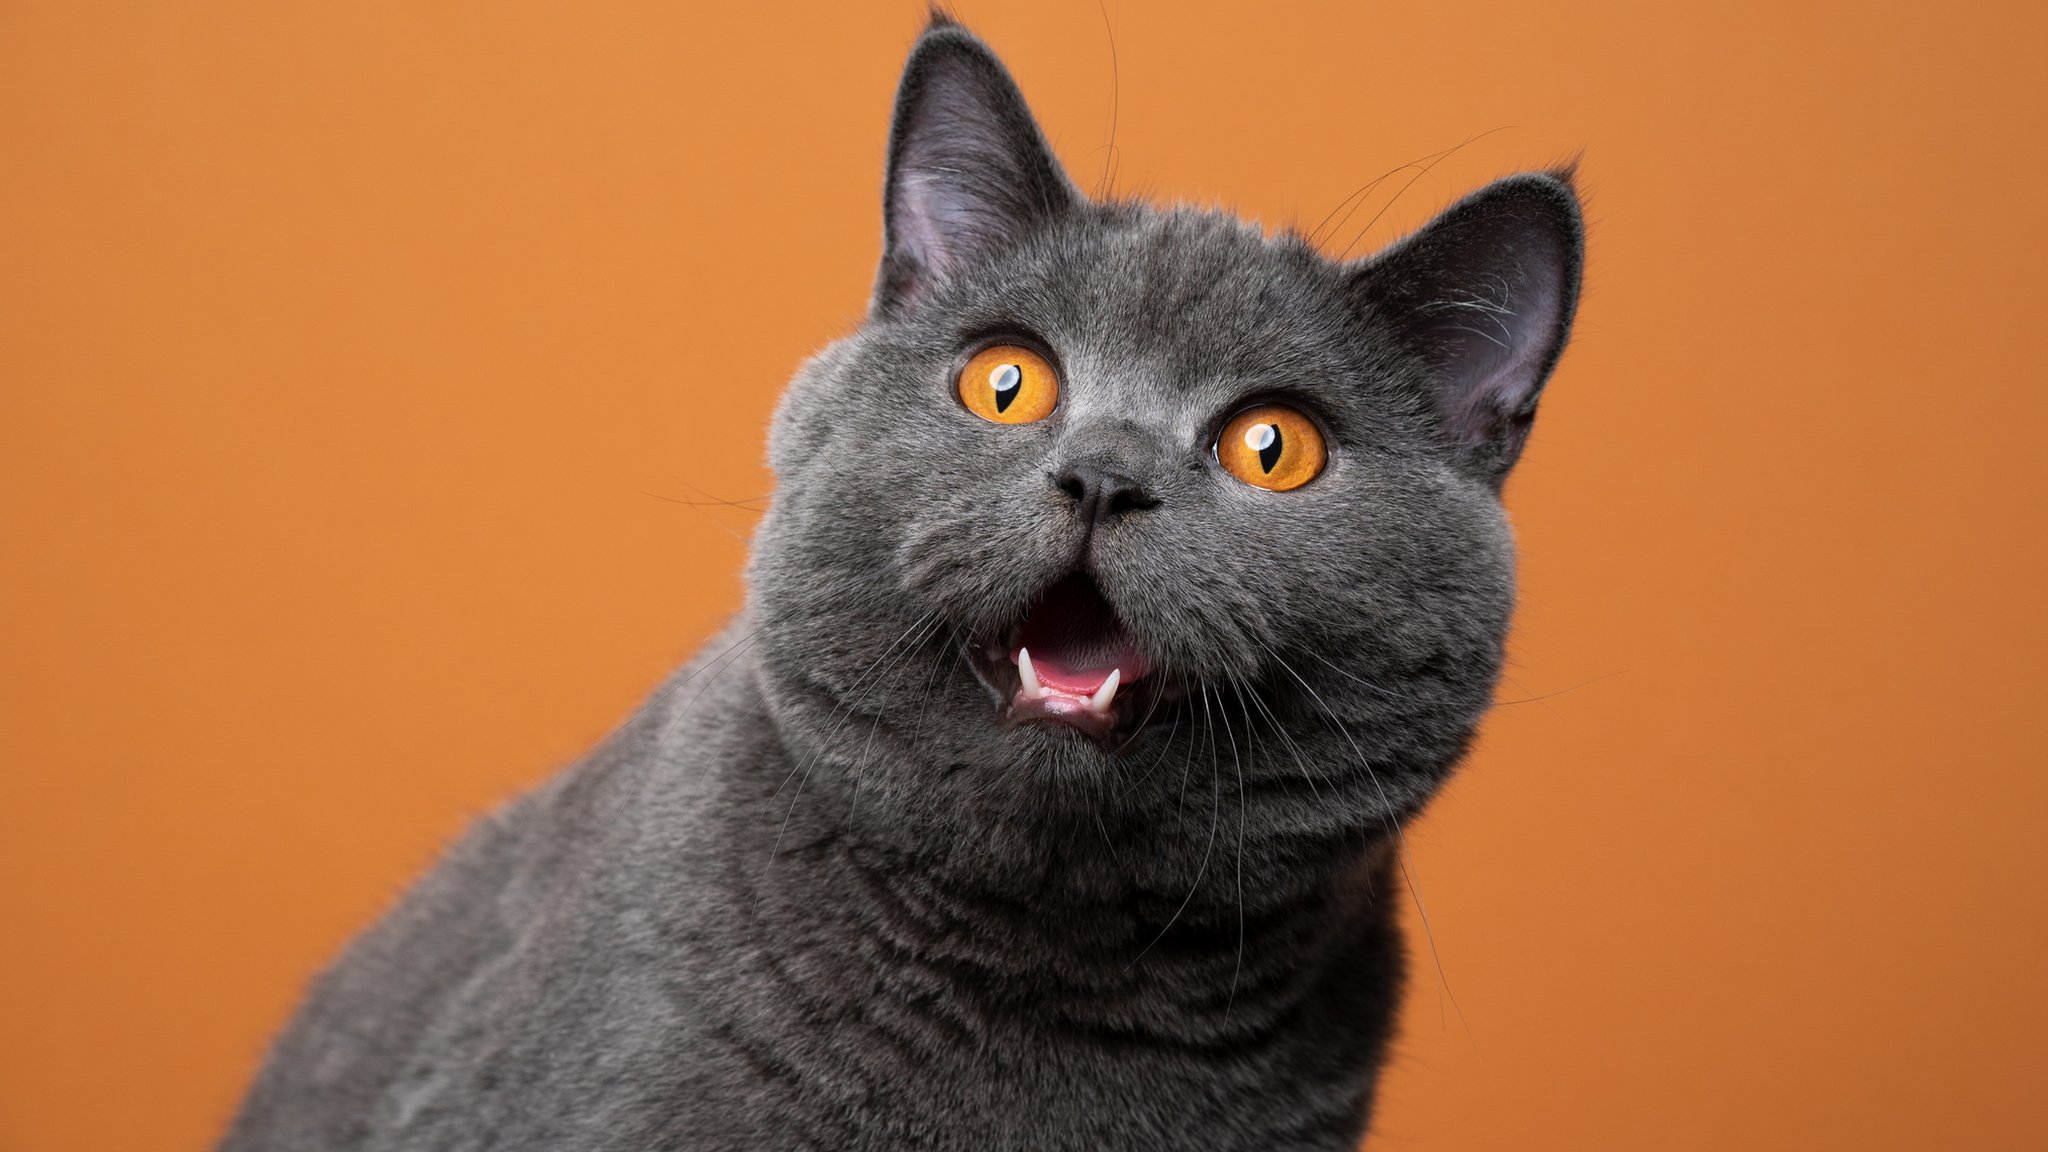 Your Cats Can Tell When You're Speaking to Them